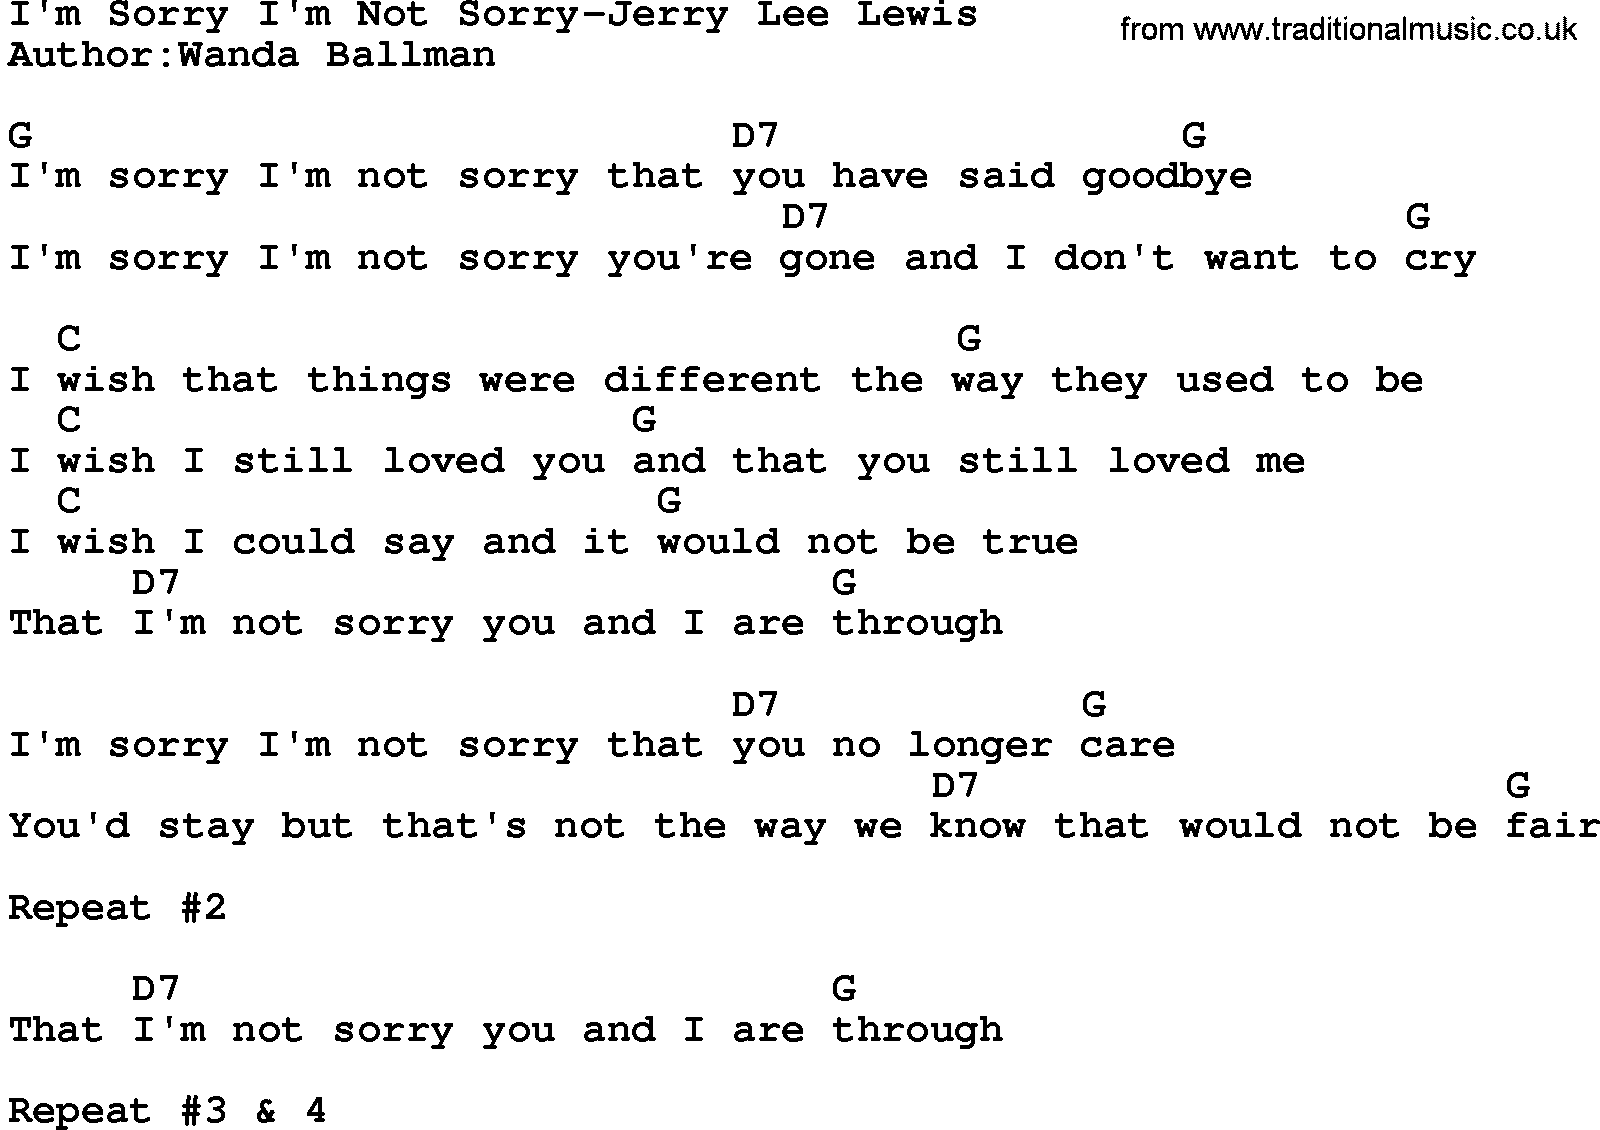 Country music song: I'm Sorry I'm Not Sorry-Jerry Lee Lewis lyrics and chords